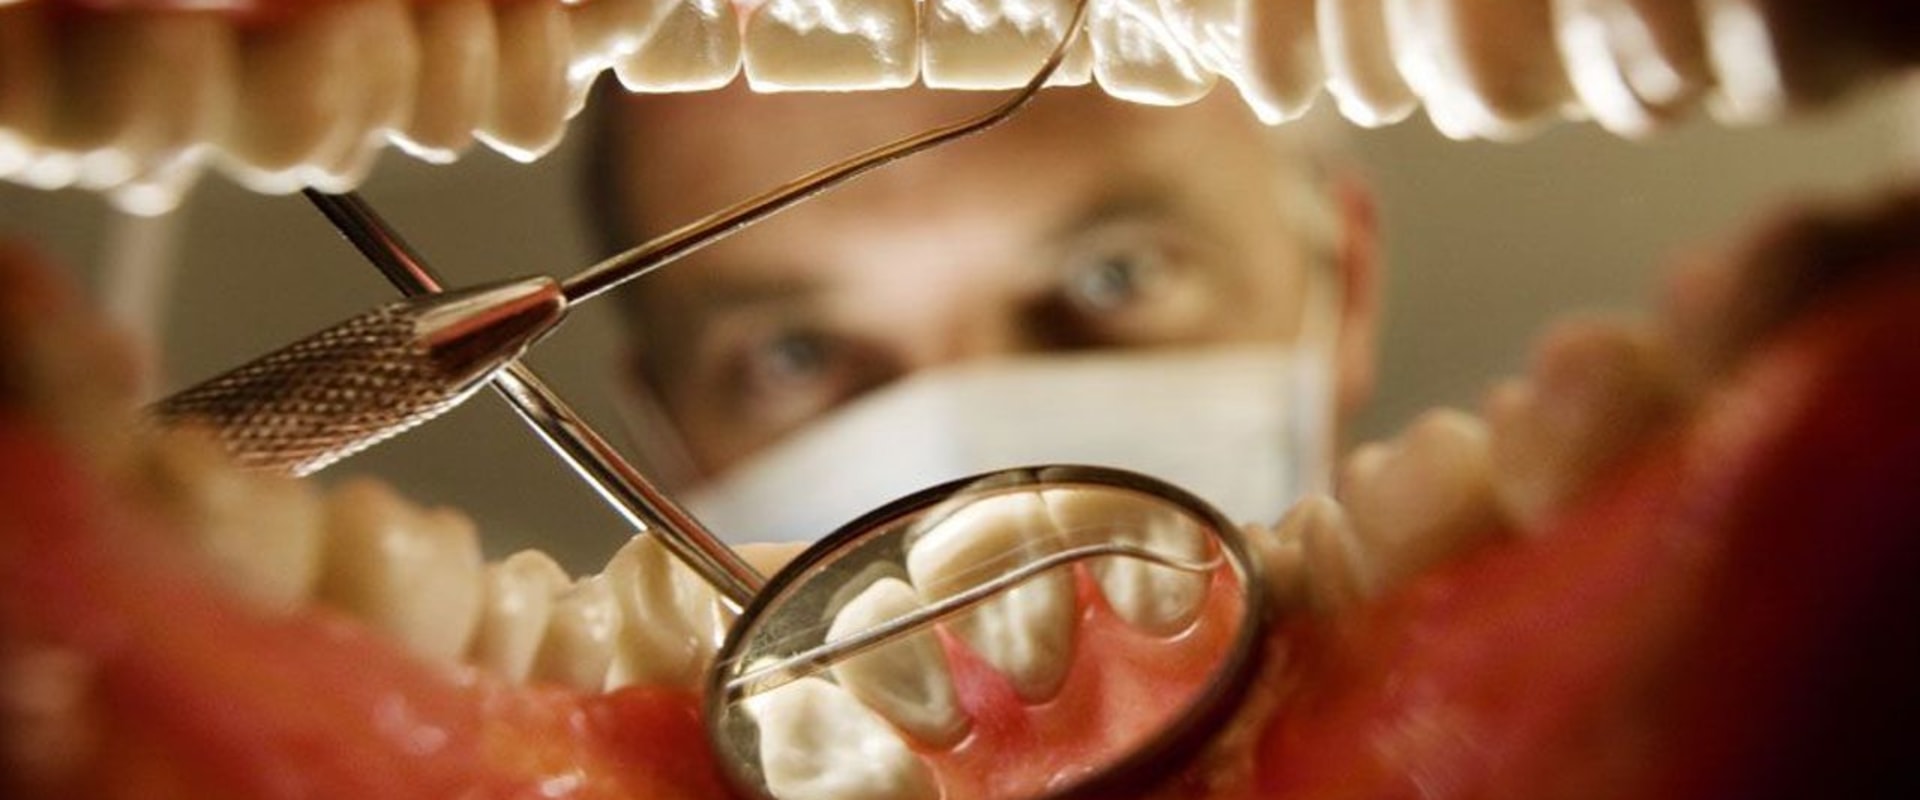 Do I Need to Have My Teeth Cleaned Before Seeing a UK Orthodontist?